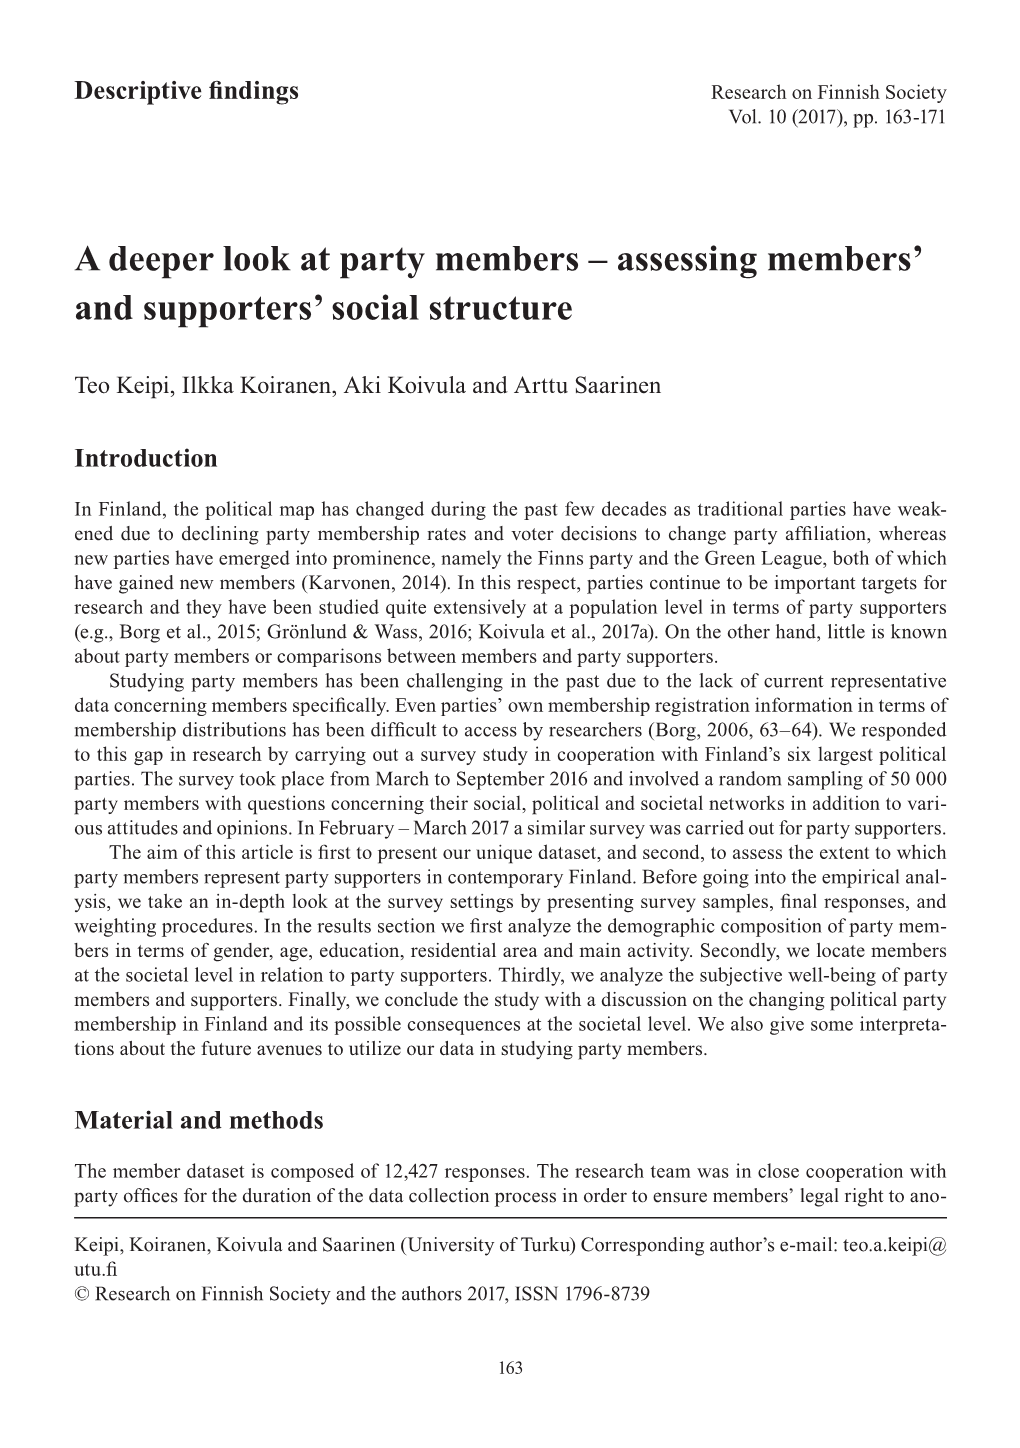 Assessing Members' and Supporters' Social Structure